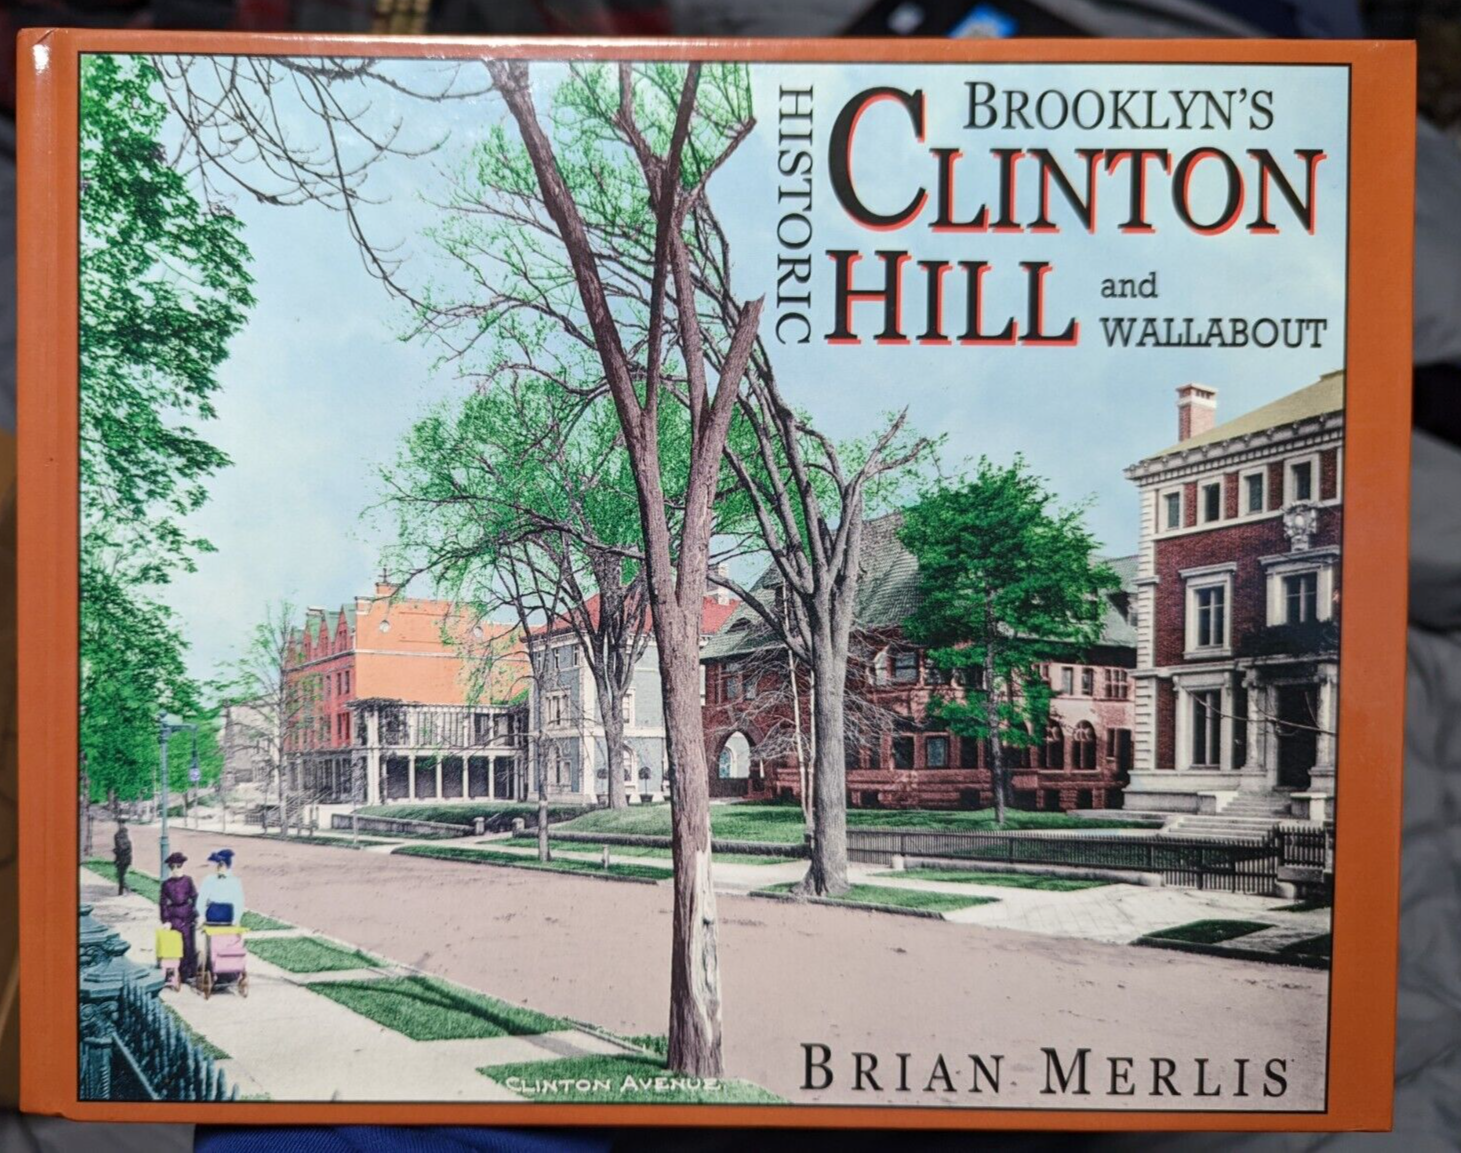 Brooklyn's Clinton Hill and Wallabout